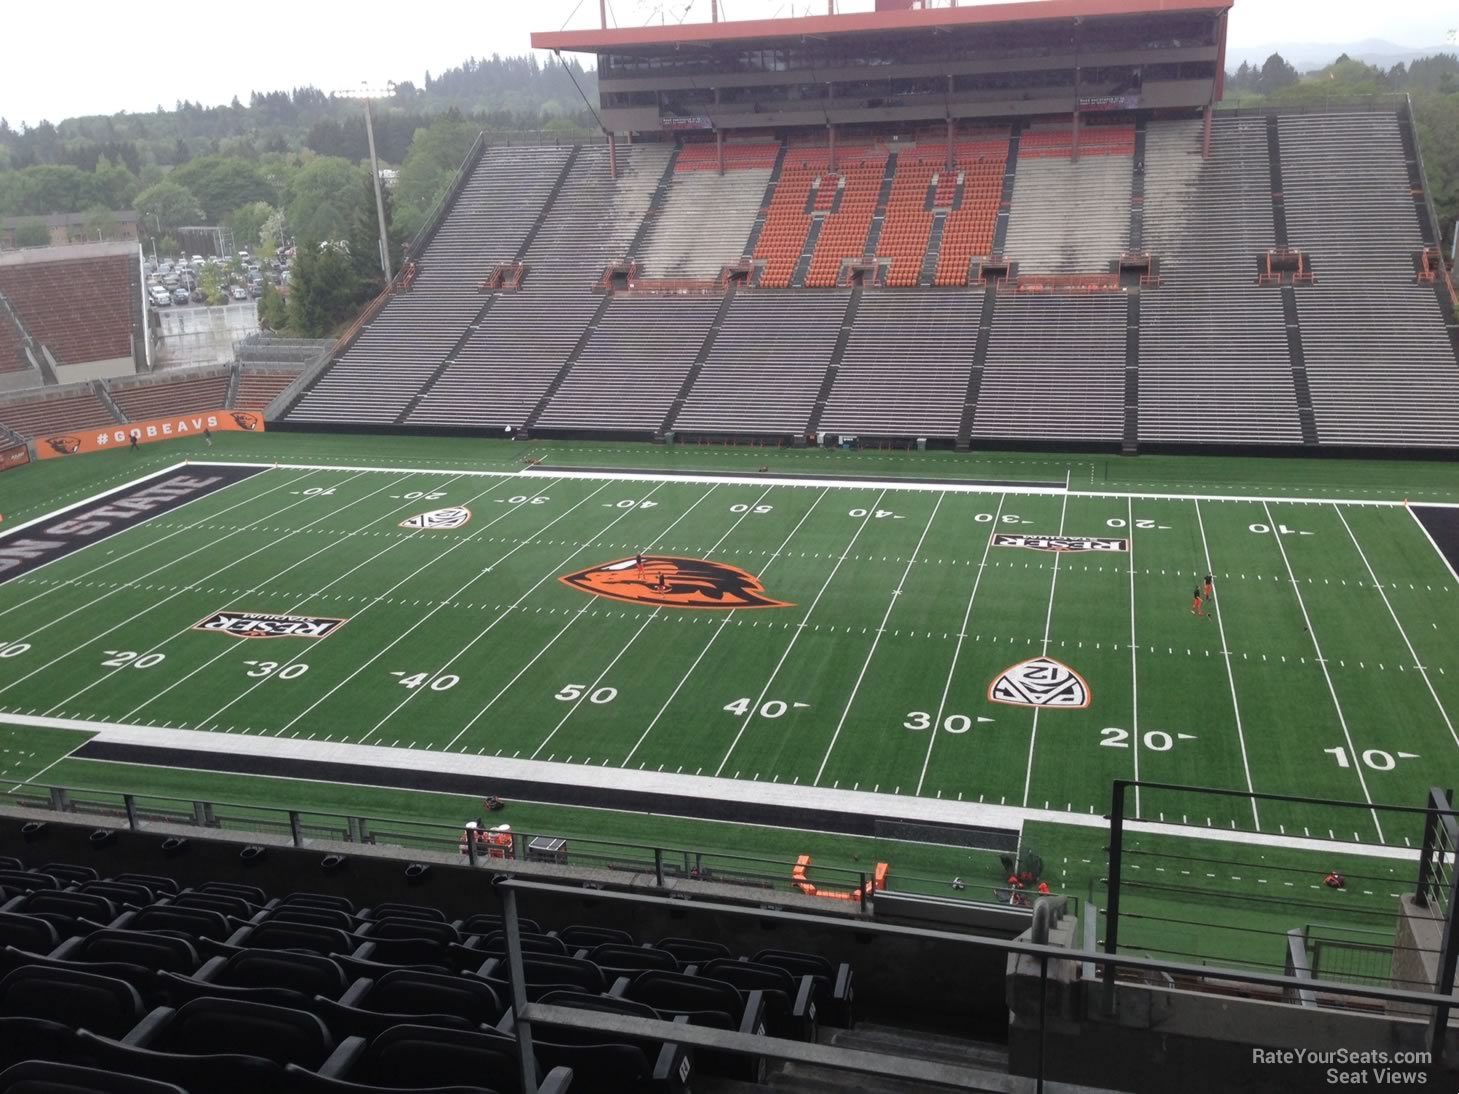 section 218, row 16 seat view  - reser stadium